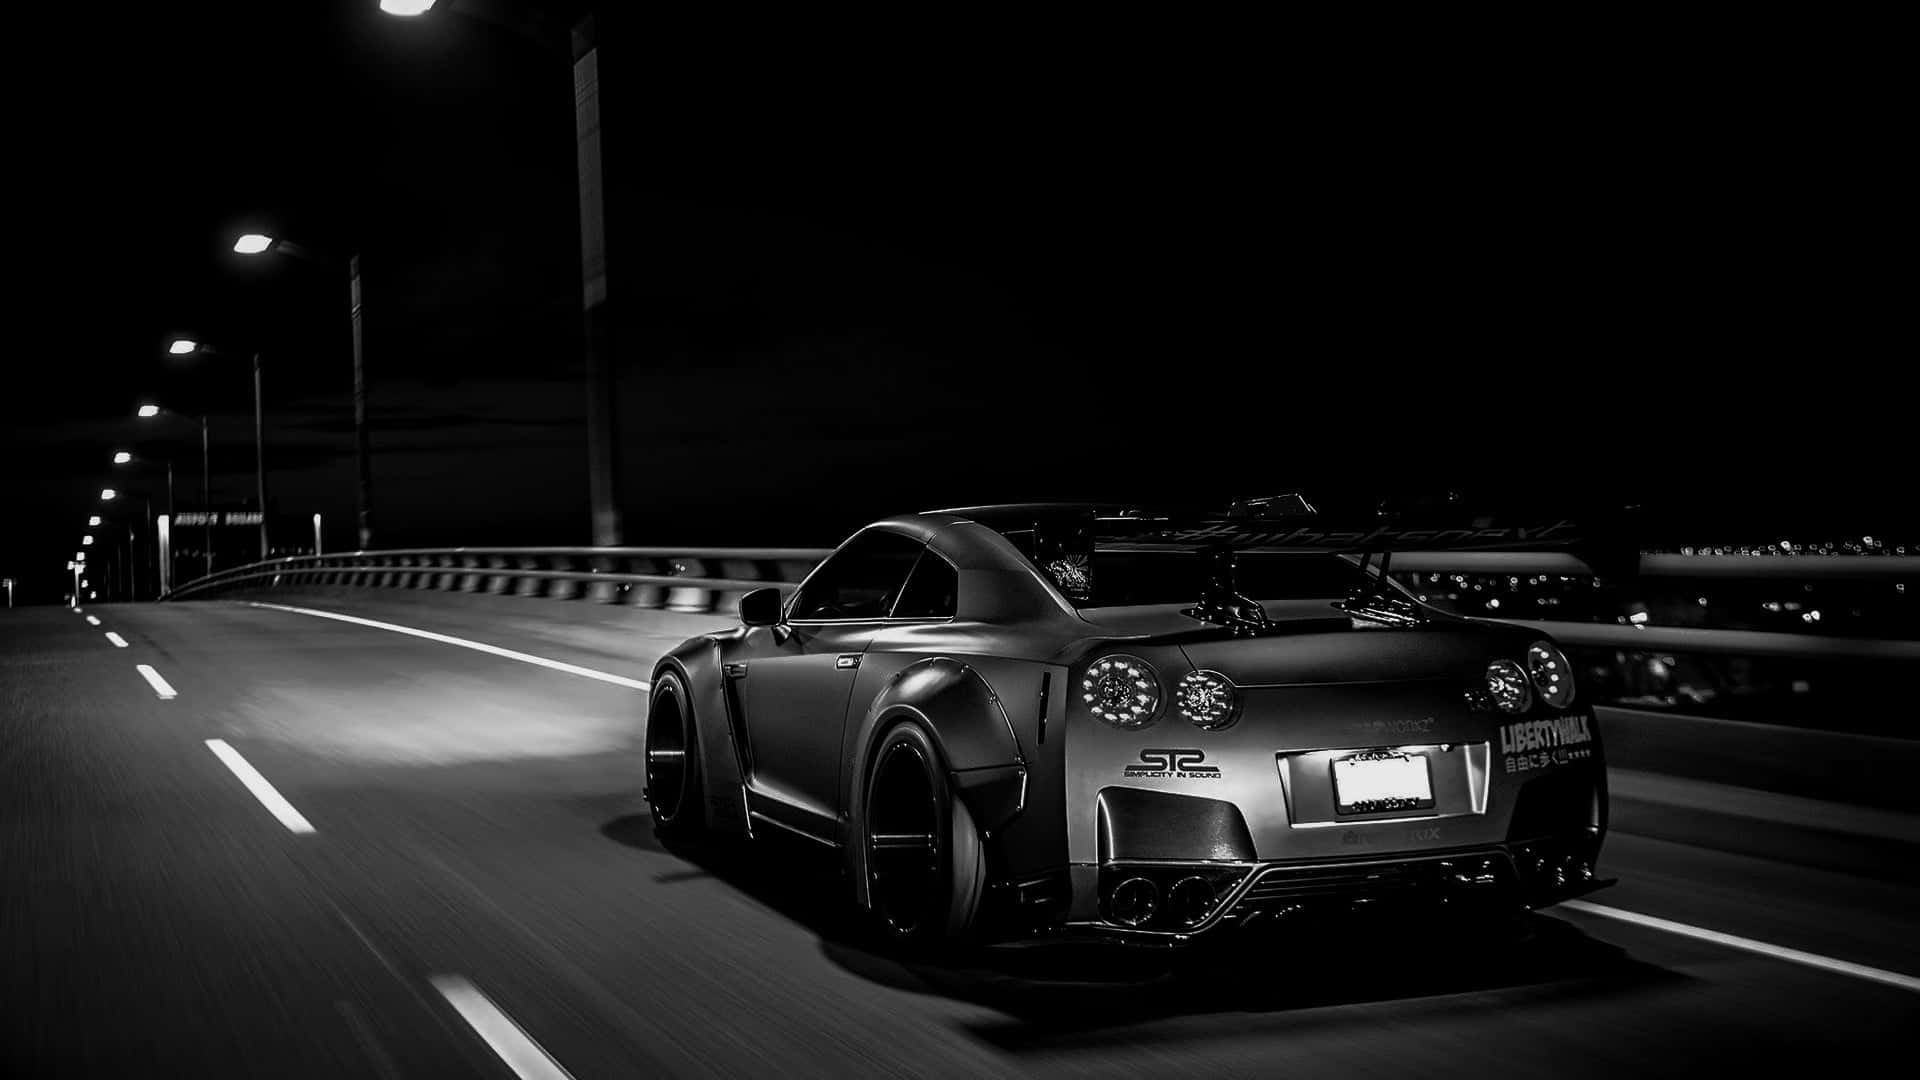 A Black And White Image Of A Sports Car Driving On A Bridge Wallpaper